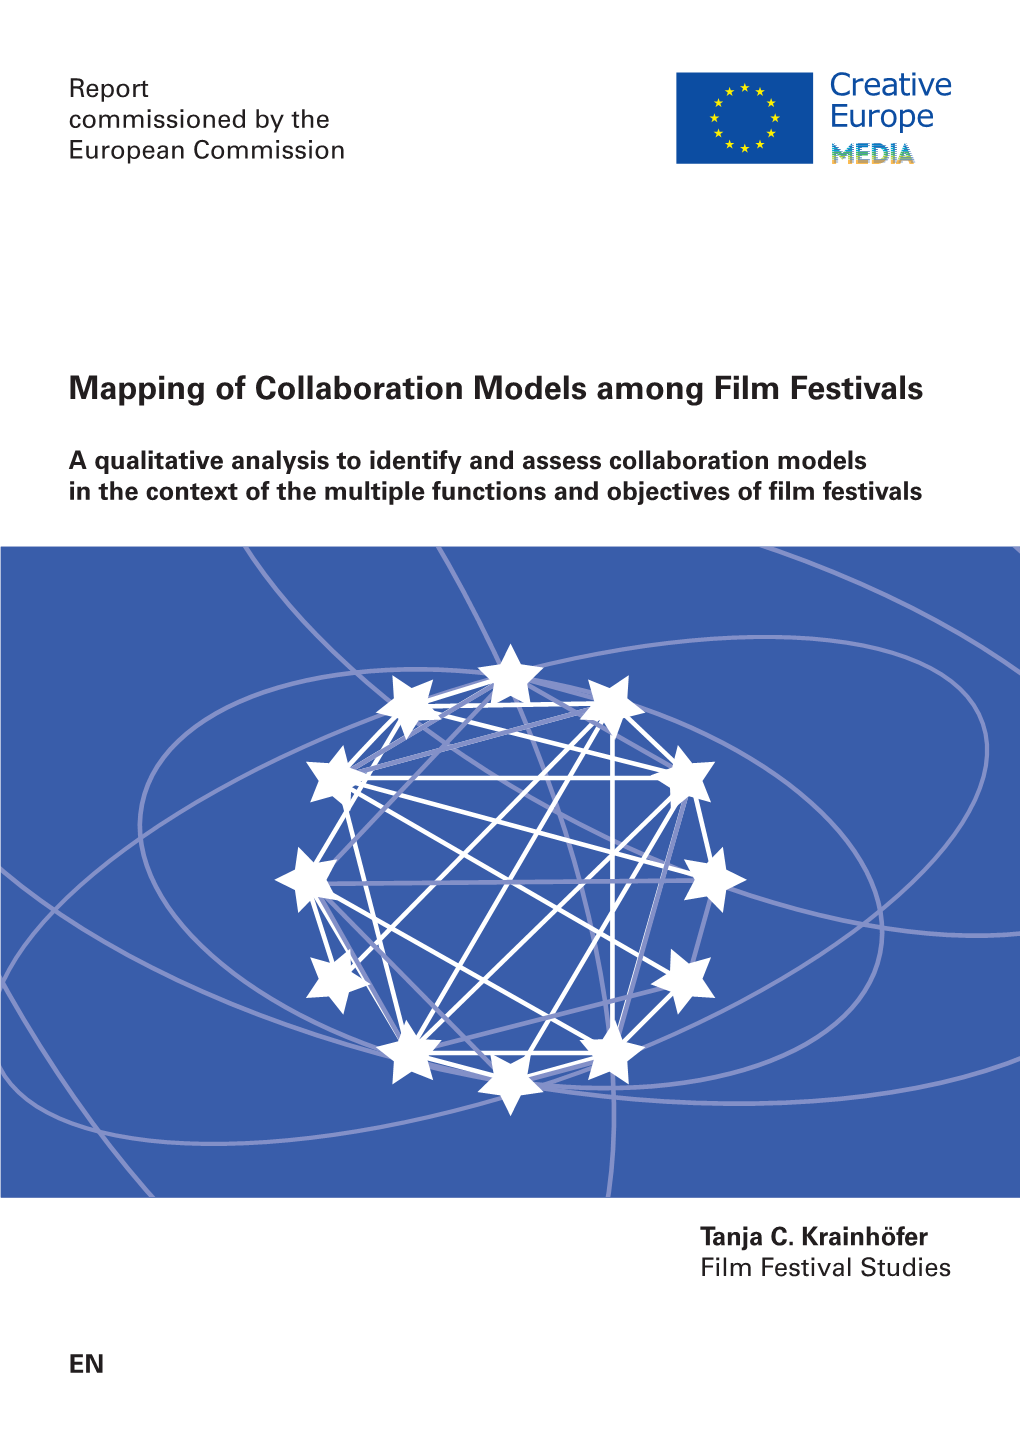 Mapping of Collaboration Models Among Film Festivals